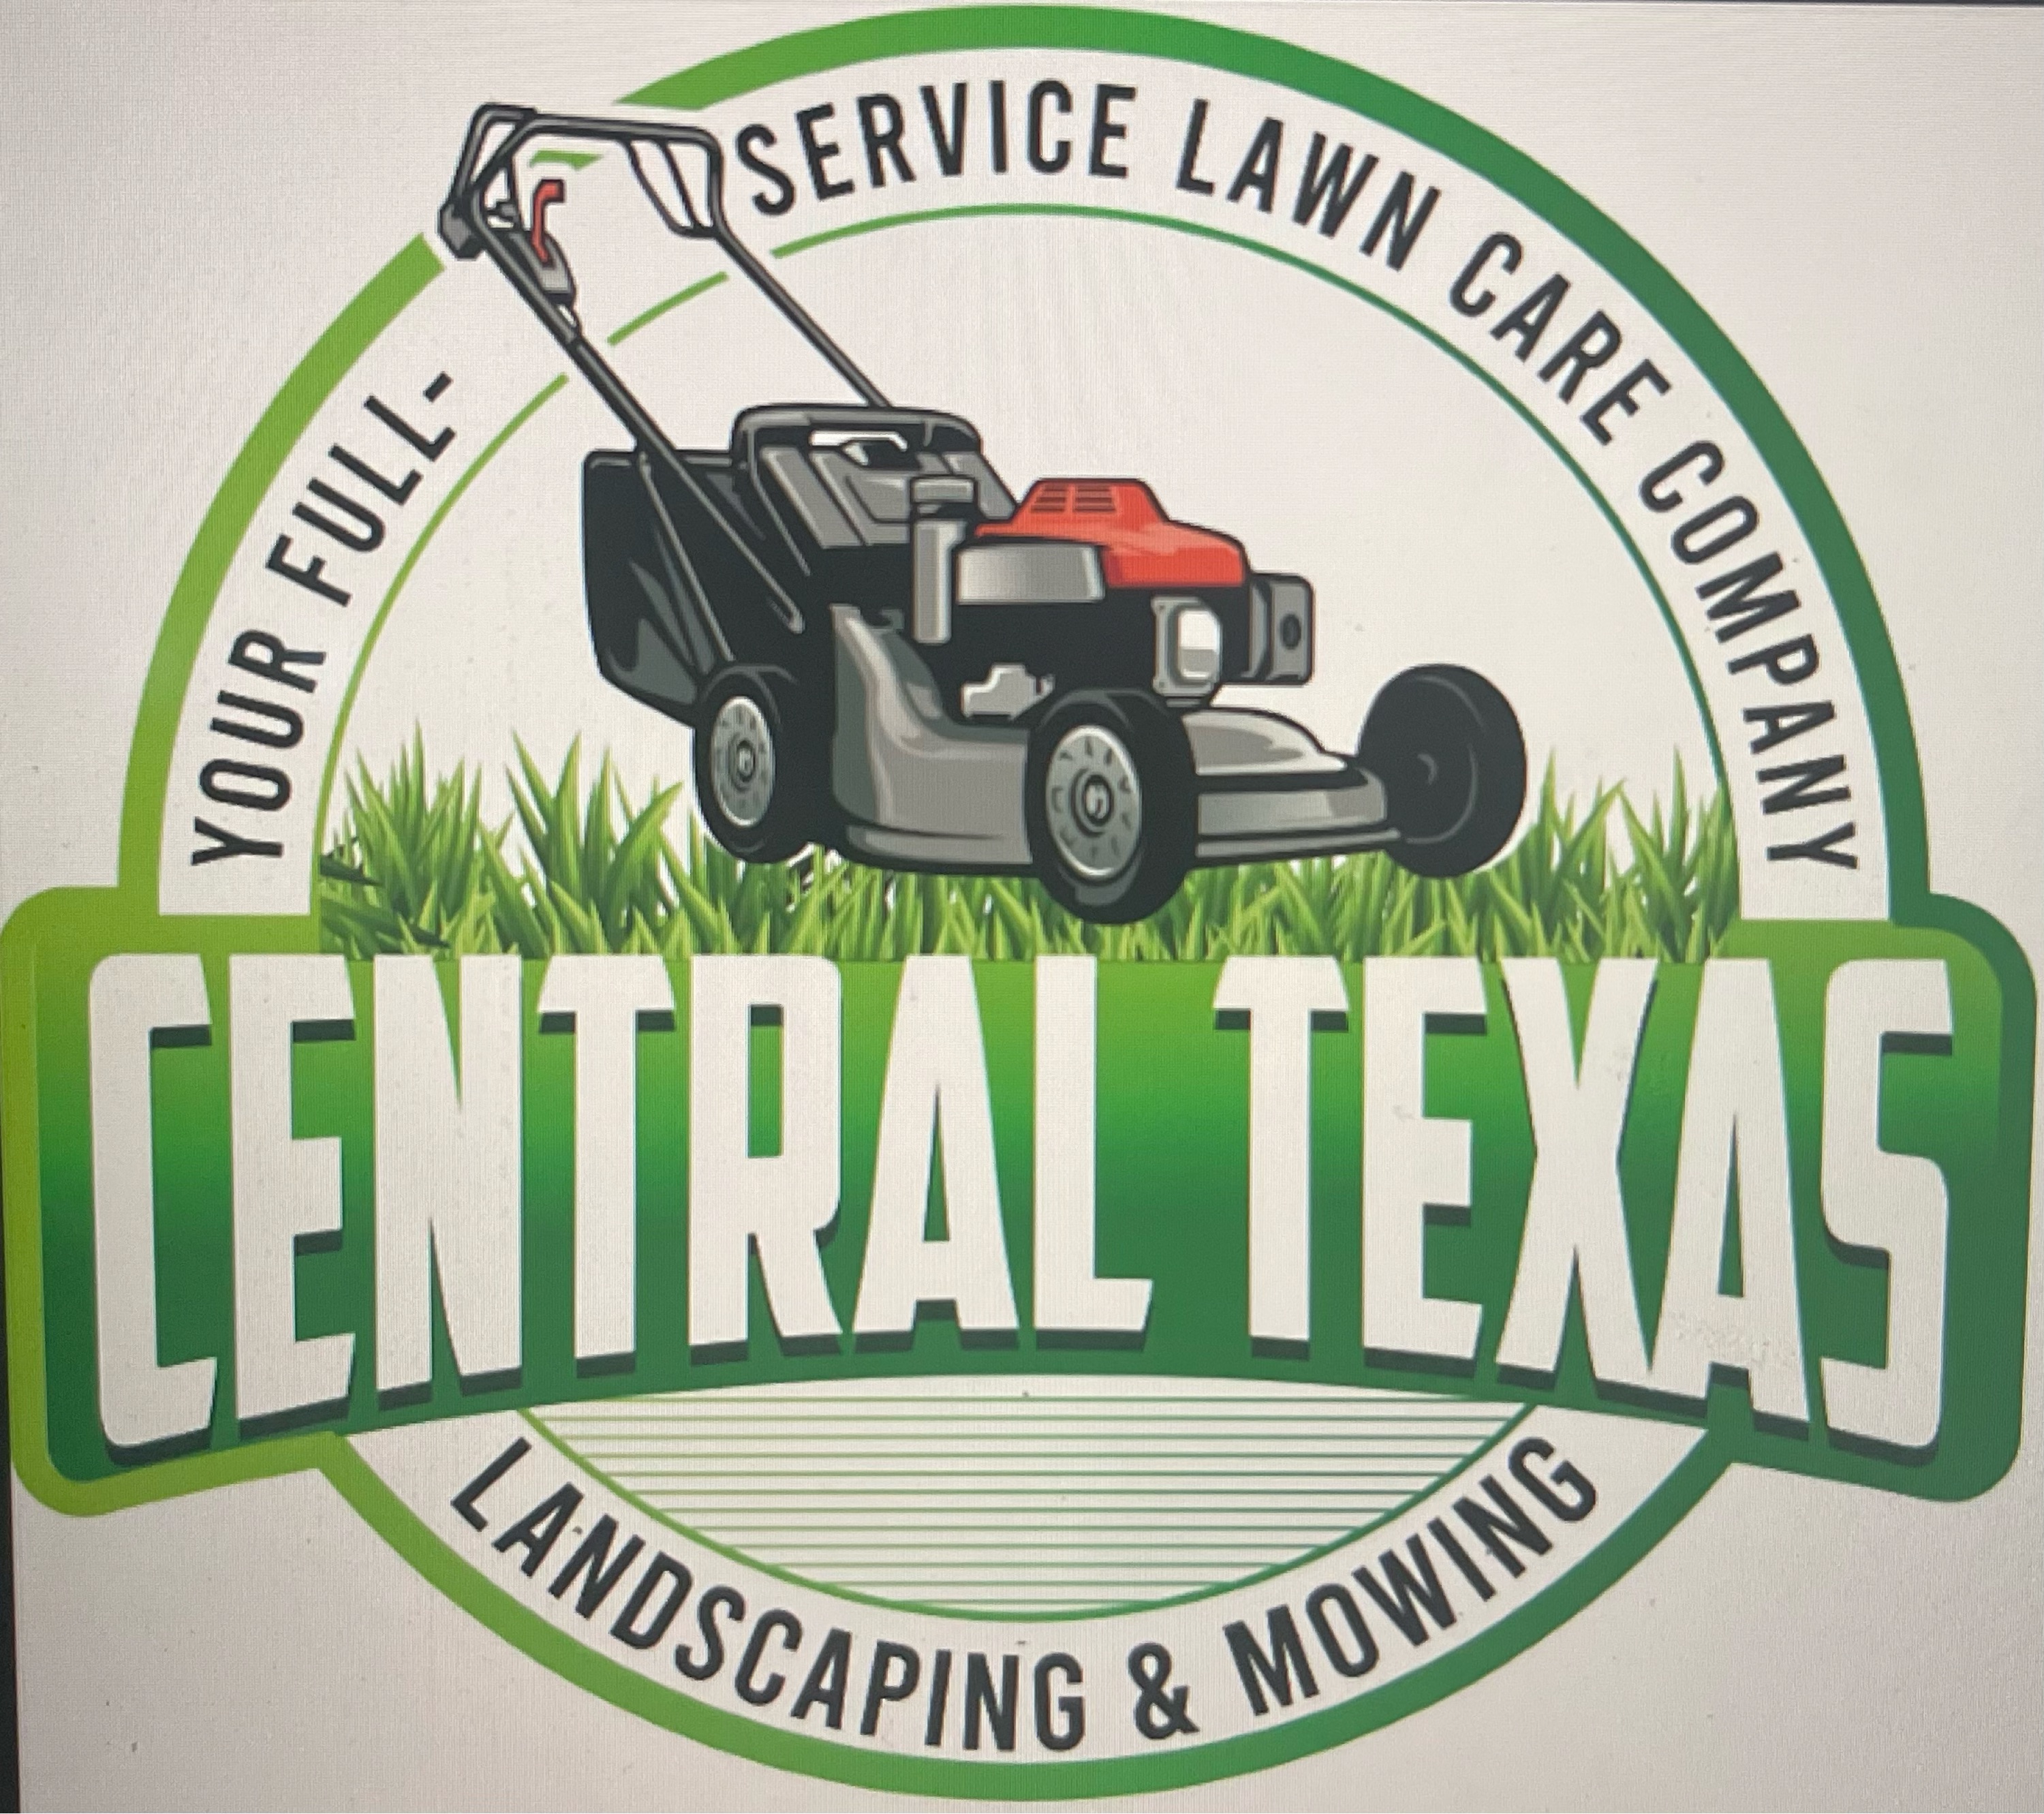 Central Texas Landscaping and Mowing Logo